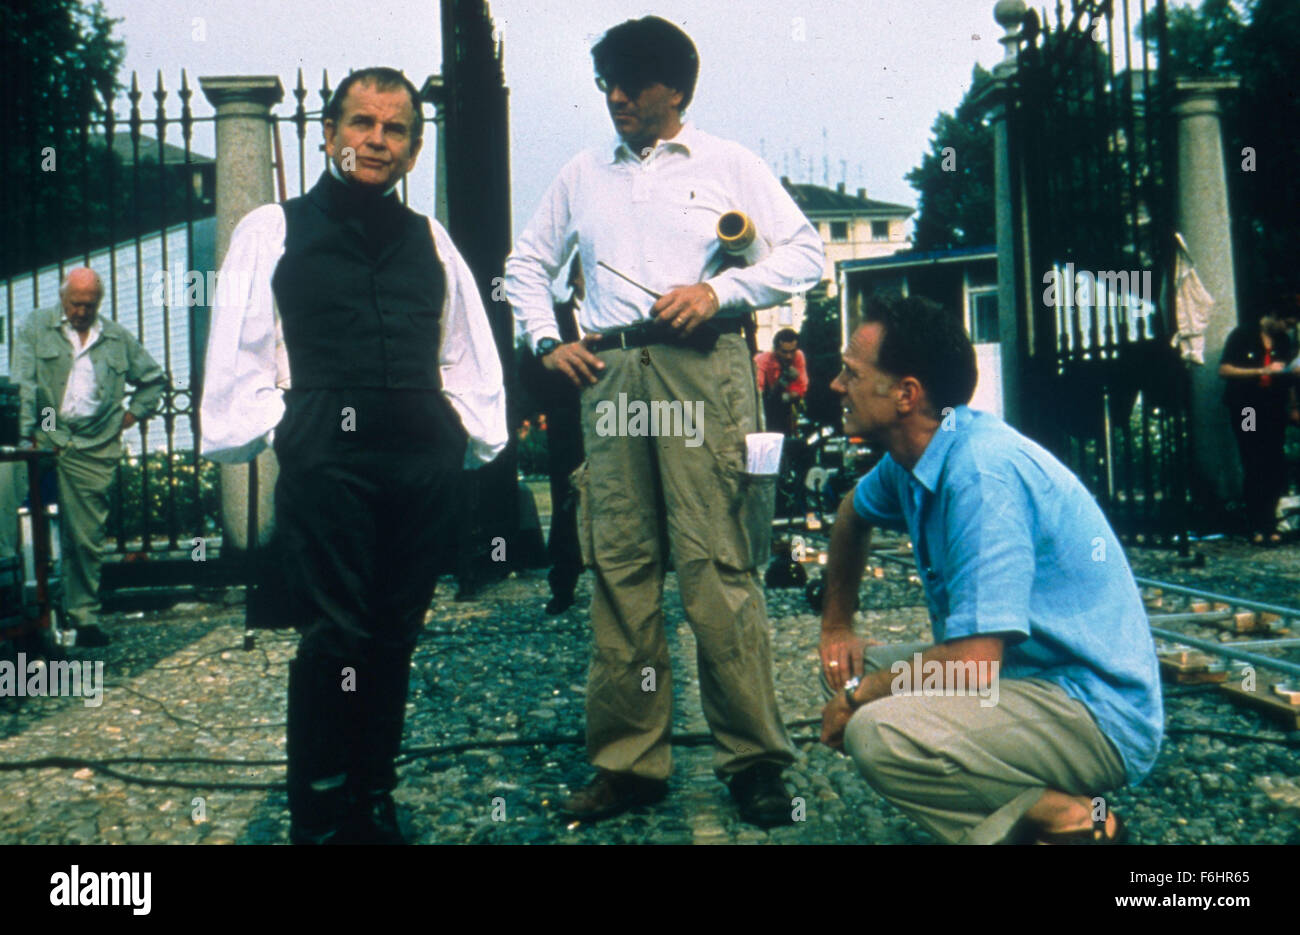 Jun 14, 2002; London, UK; (L-R): Assistant director SERGIO ERCOLESSI, ALAN TAYLOR, and SIR IAN HOLM on the set of the film comedy 'The Emperor's New Clothes.' Stock Photo